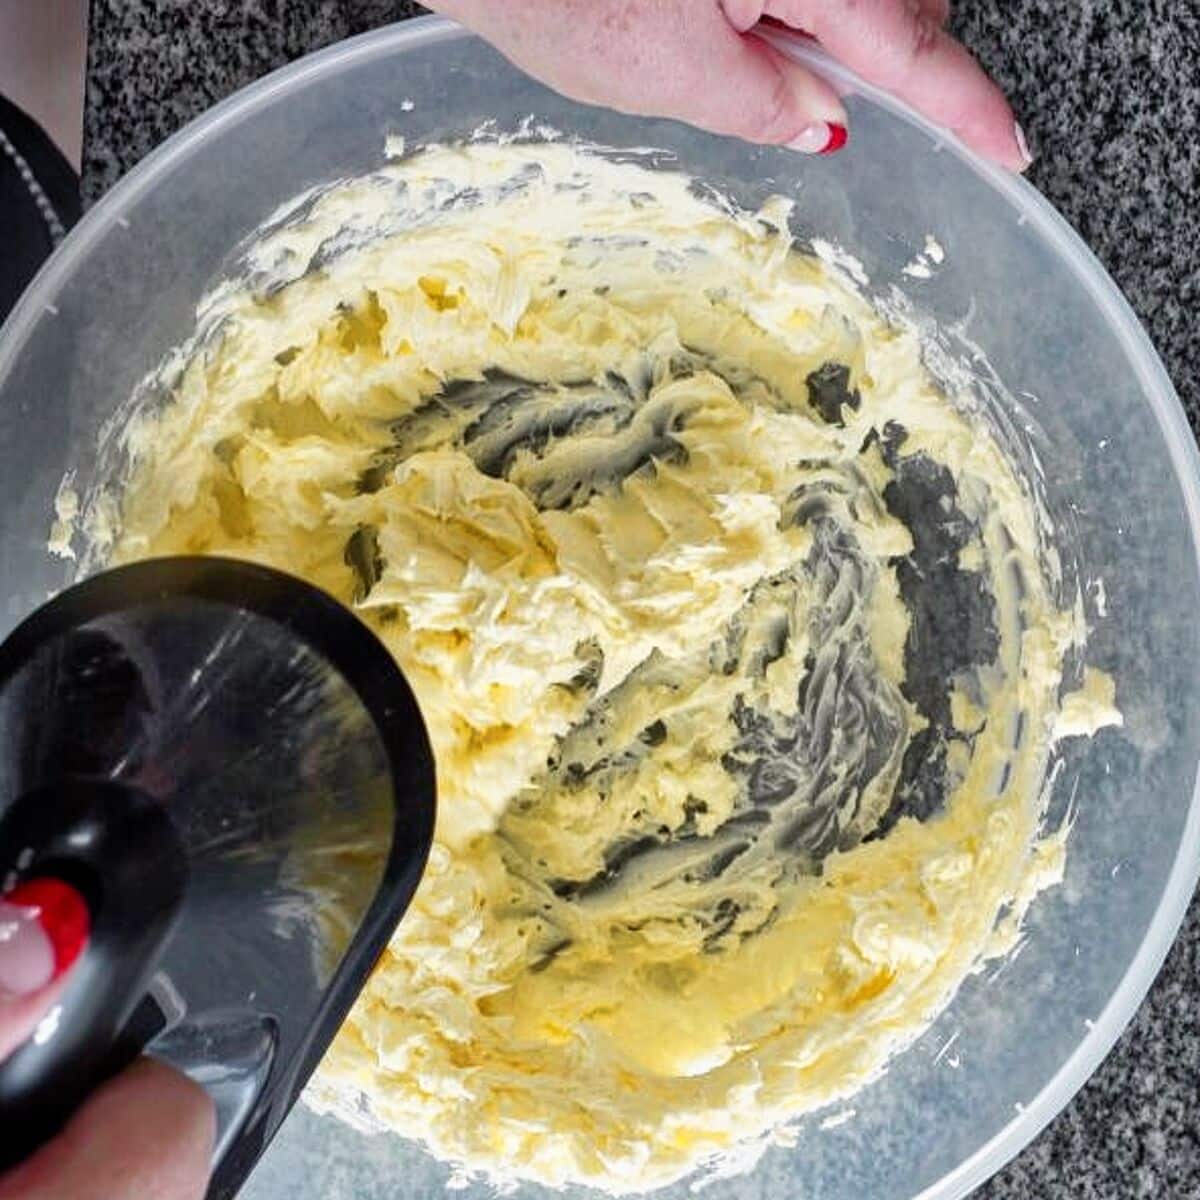 beating butter in a large plastic bowl with handheld mixer.